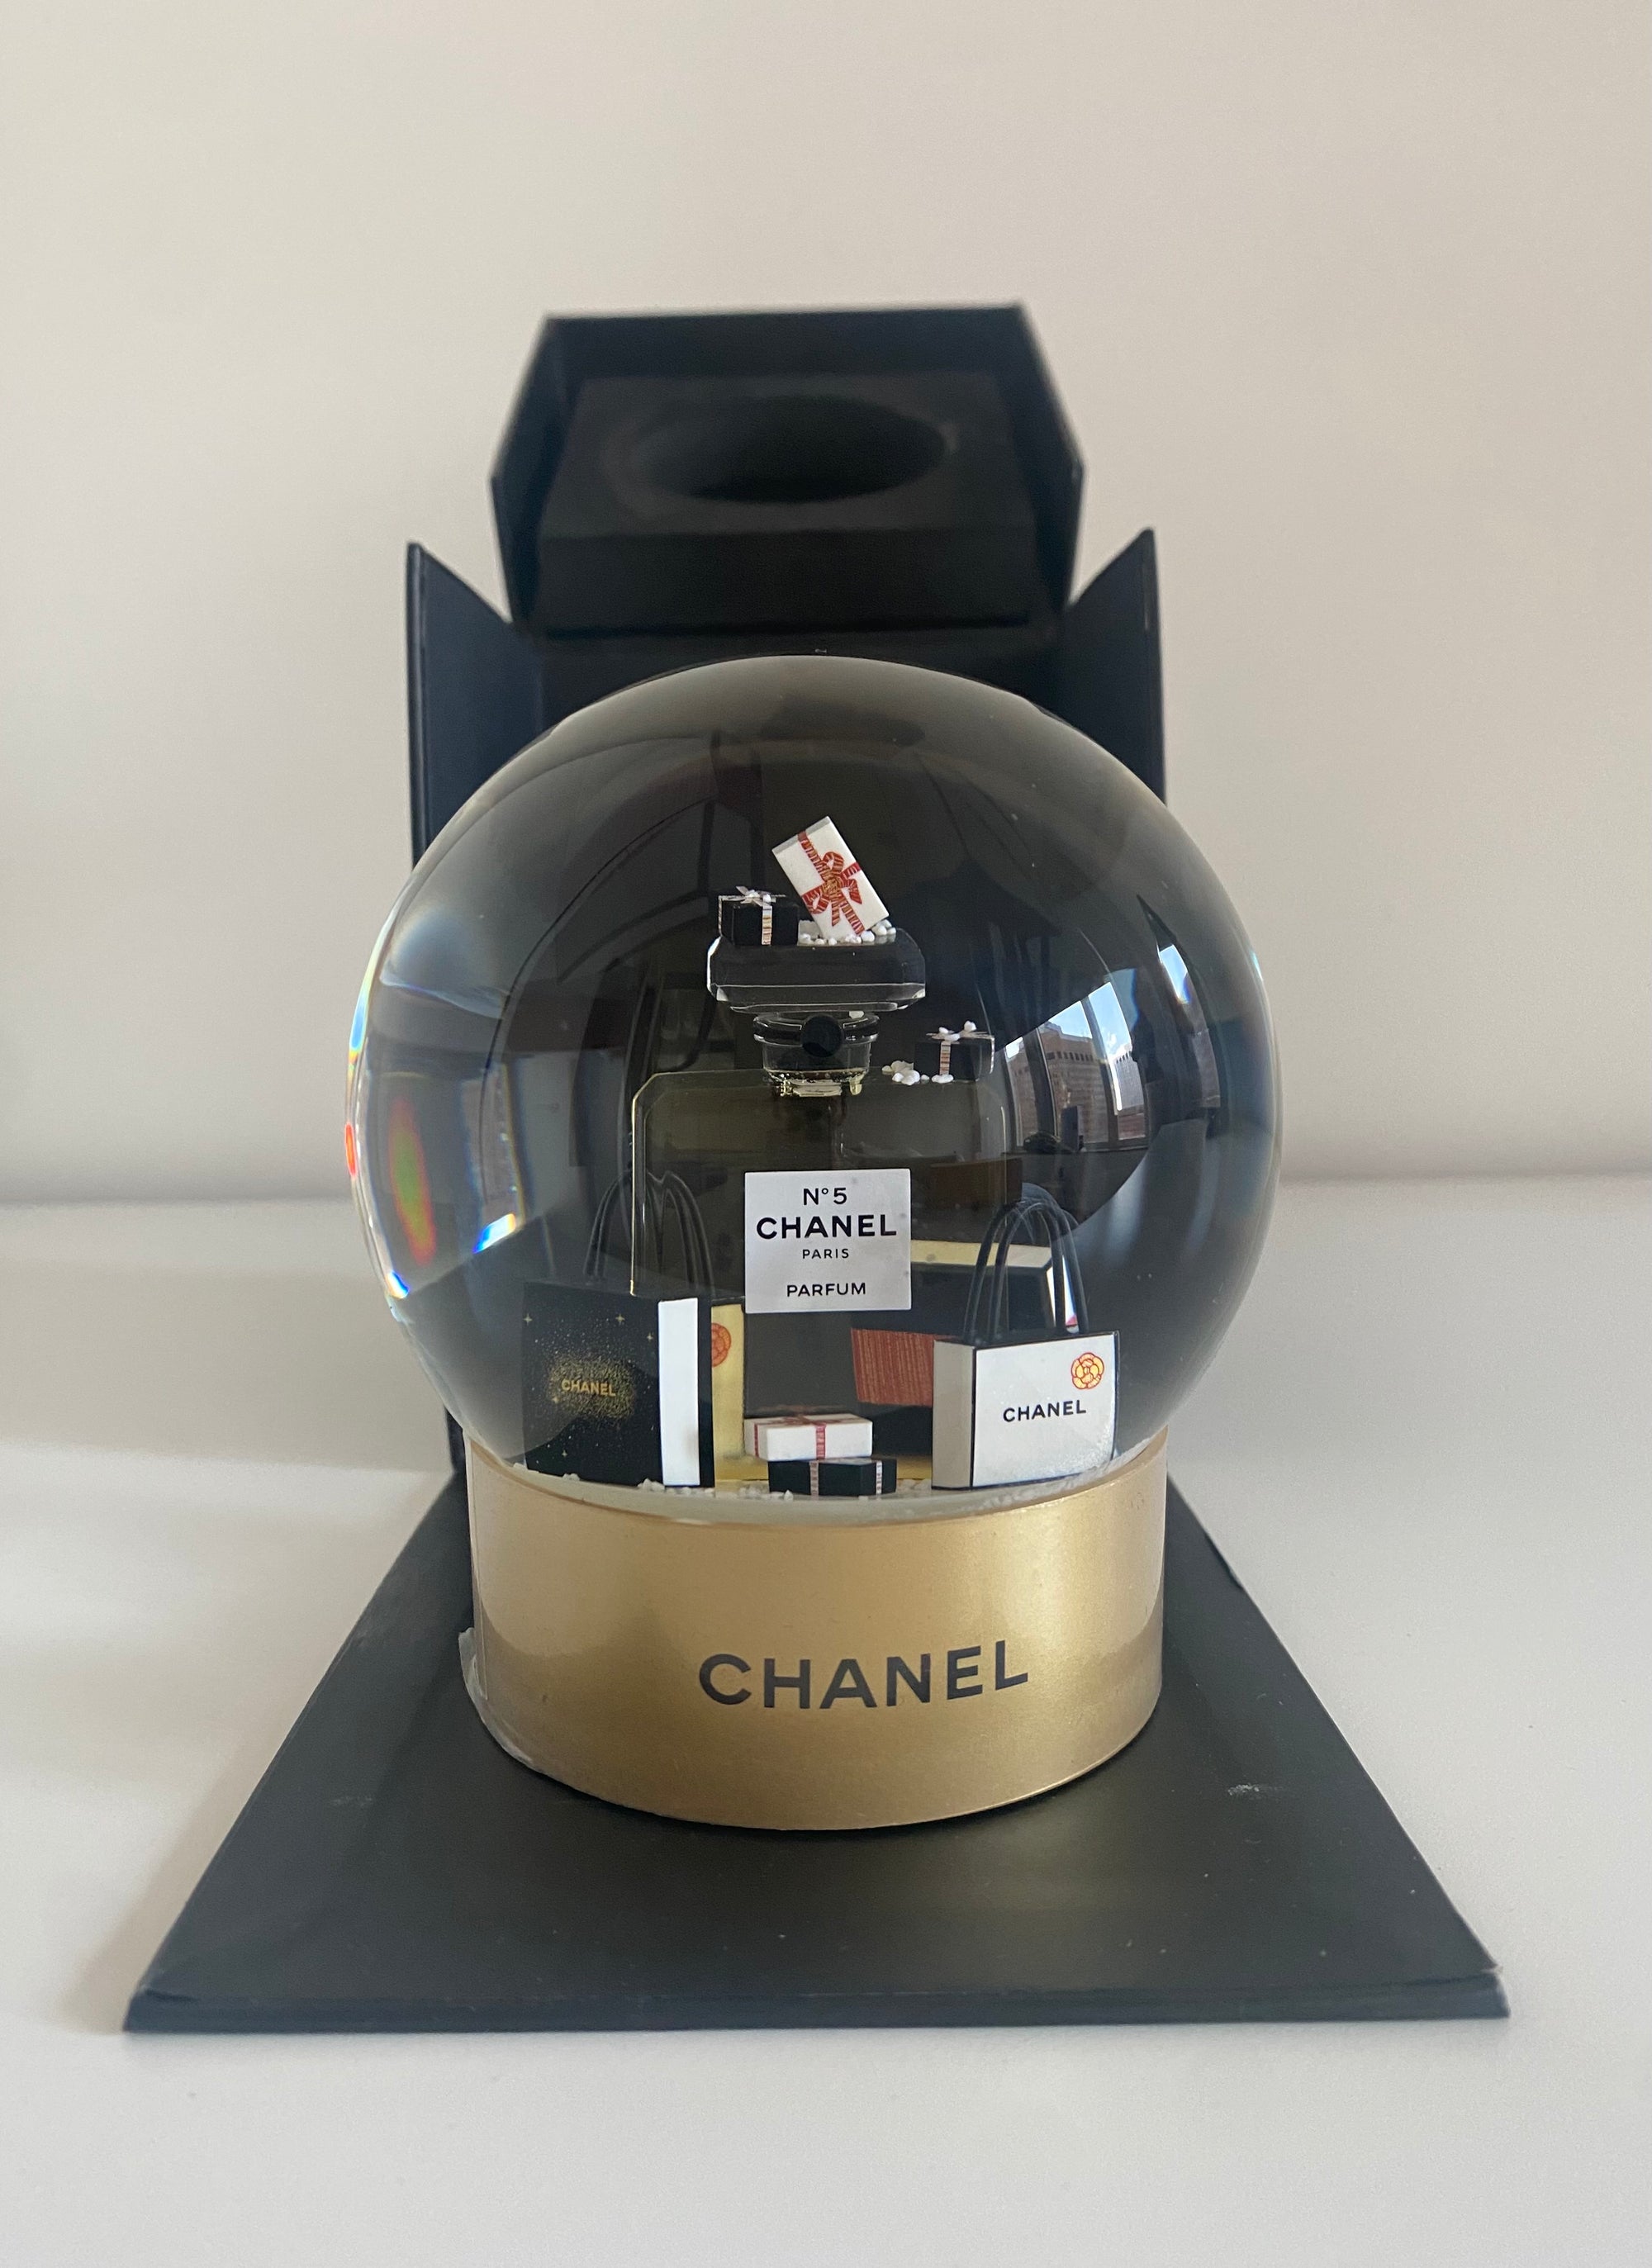 Chanel N°5 Perfume And Shopping Bag Motorized Snow Globe Available For  Immediate Sale At Sotheby's